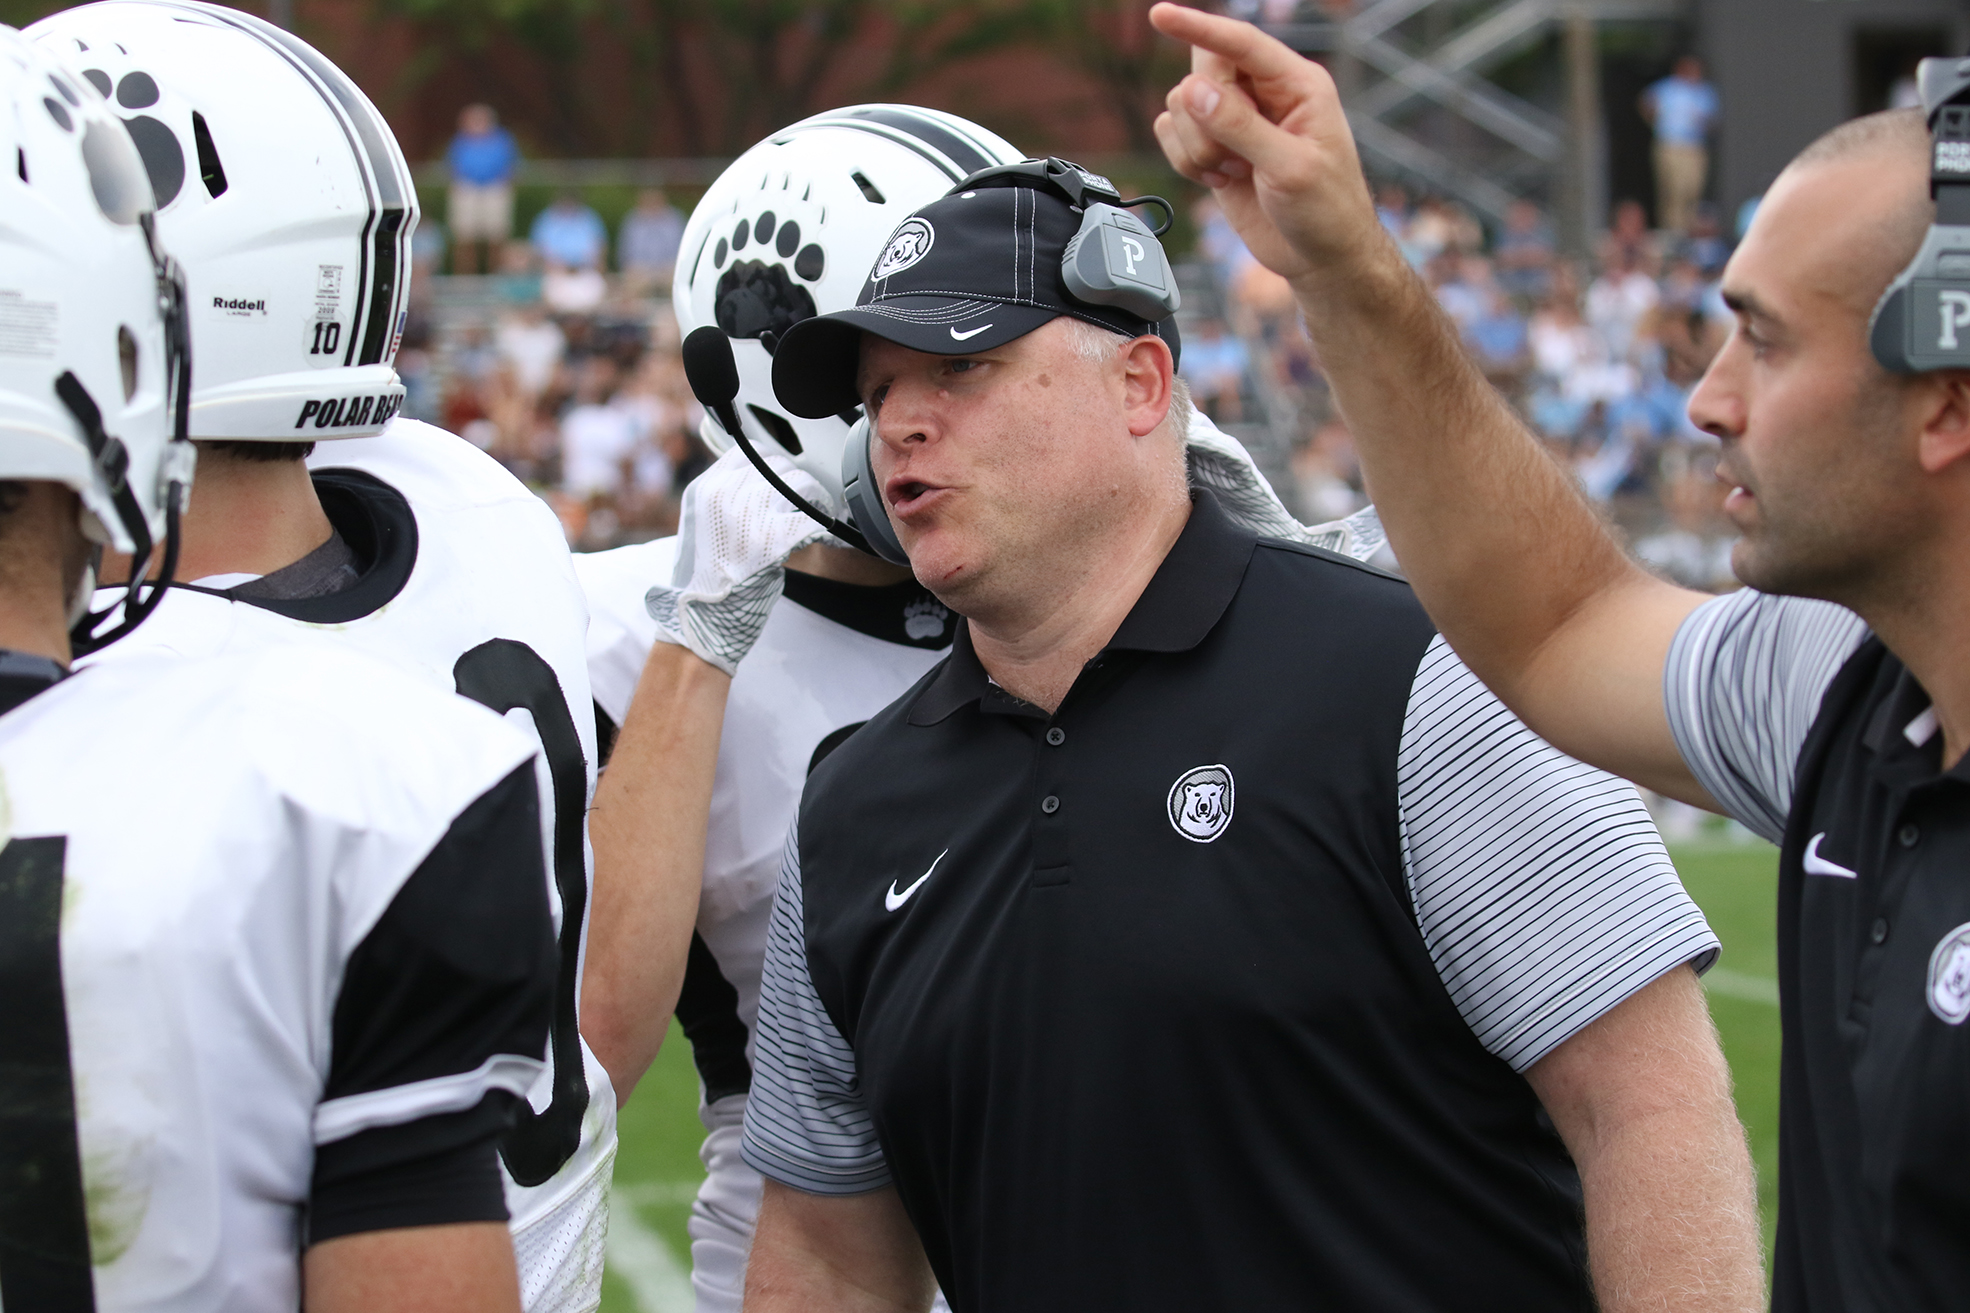 Head football coach leaves college with 3-31 record – The Bowdoin